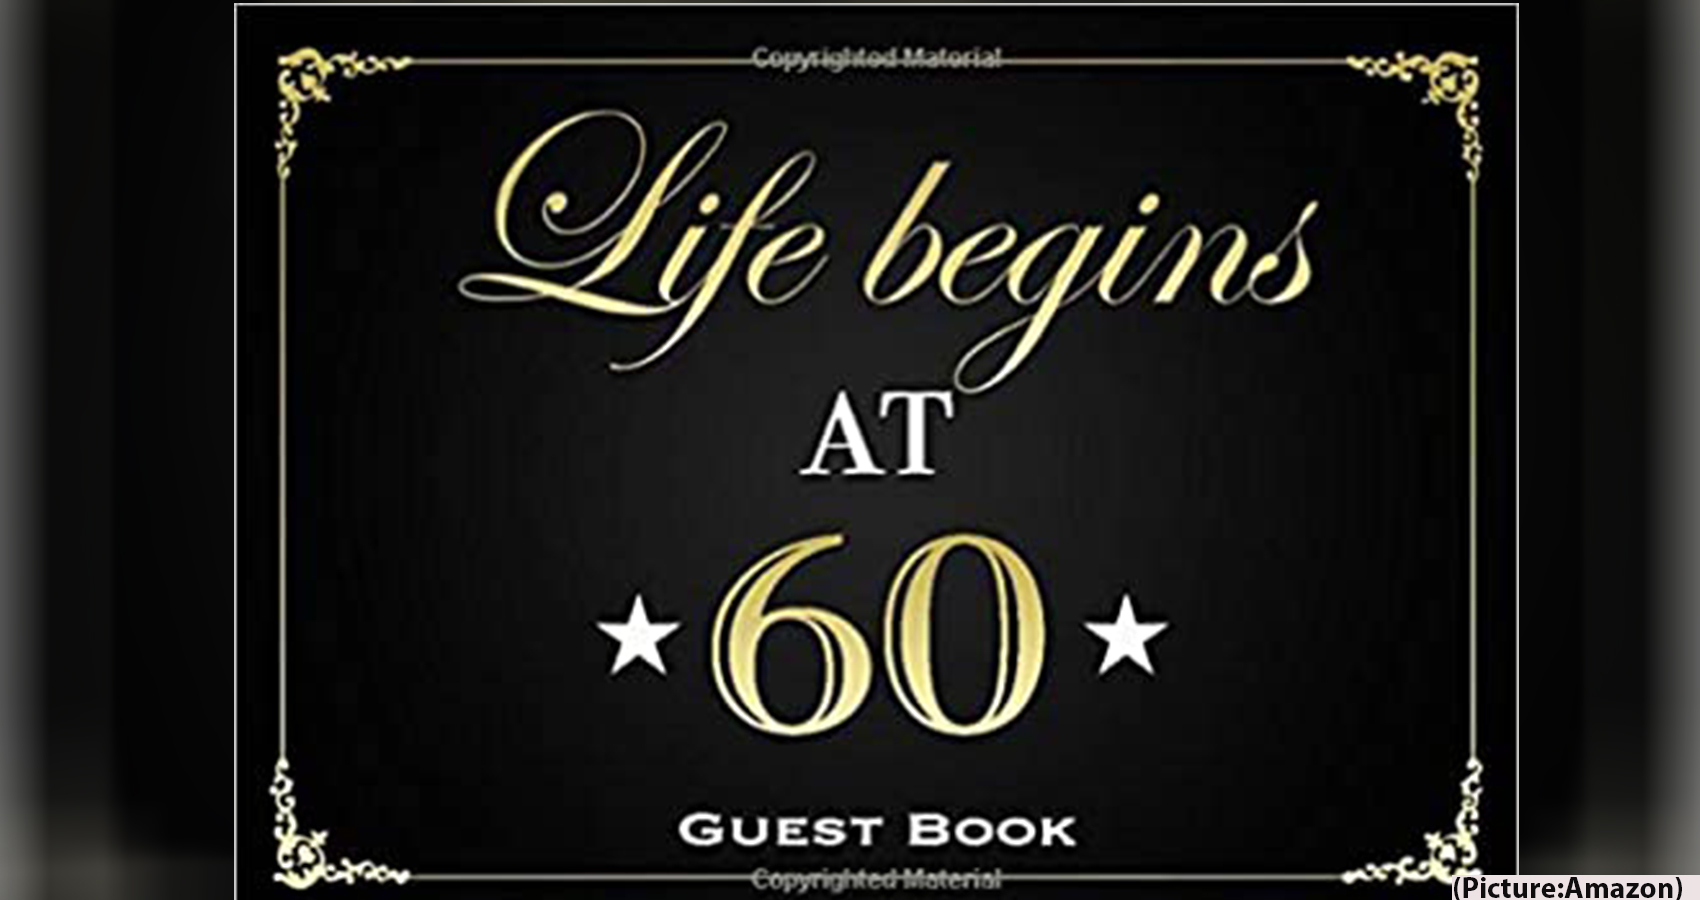 Life Begins At 60; No Work, Only Leisure, These Are The Best Years, After All!